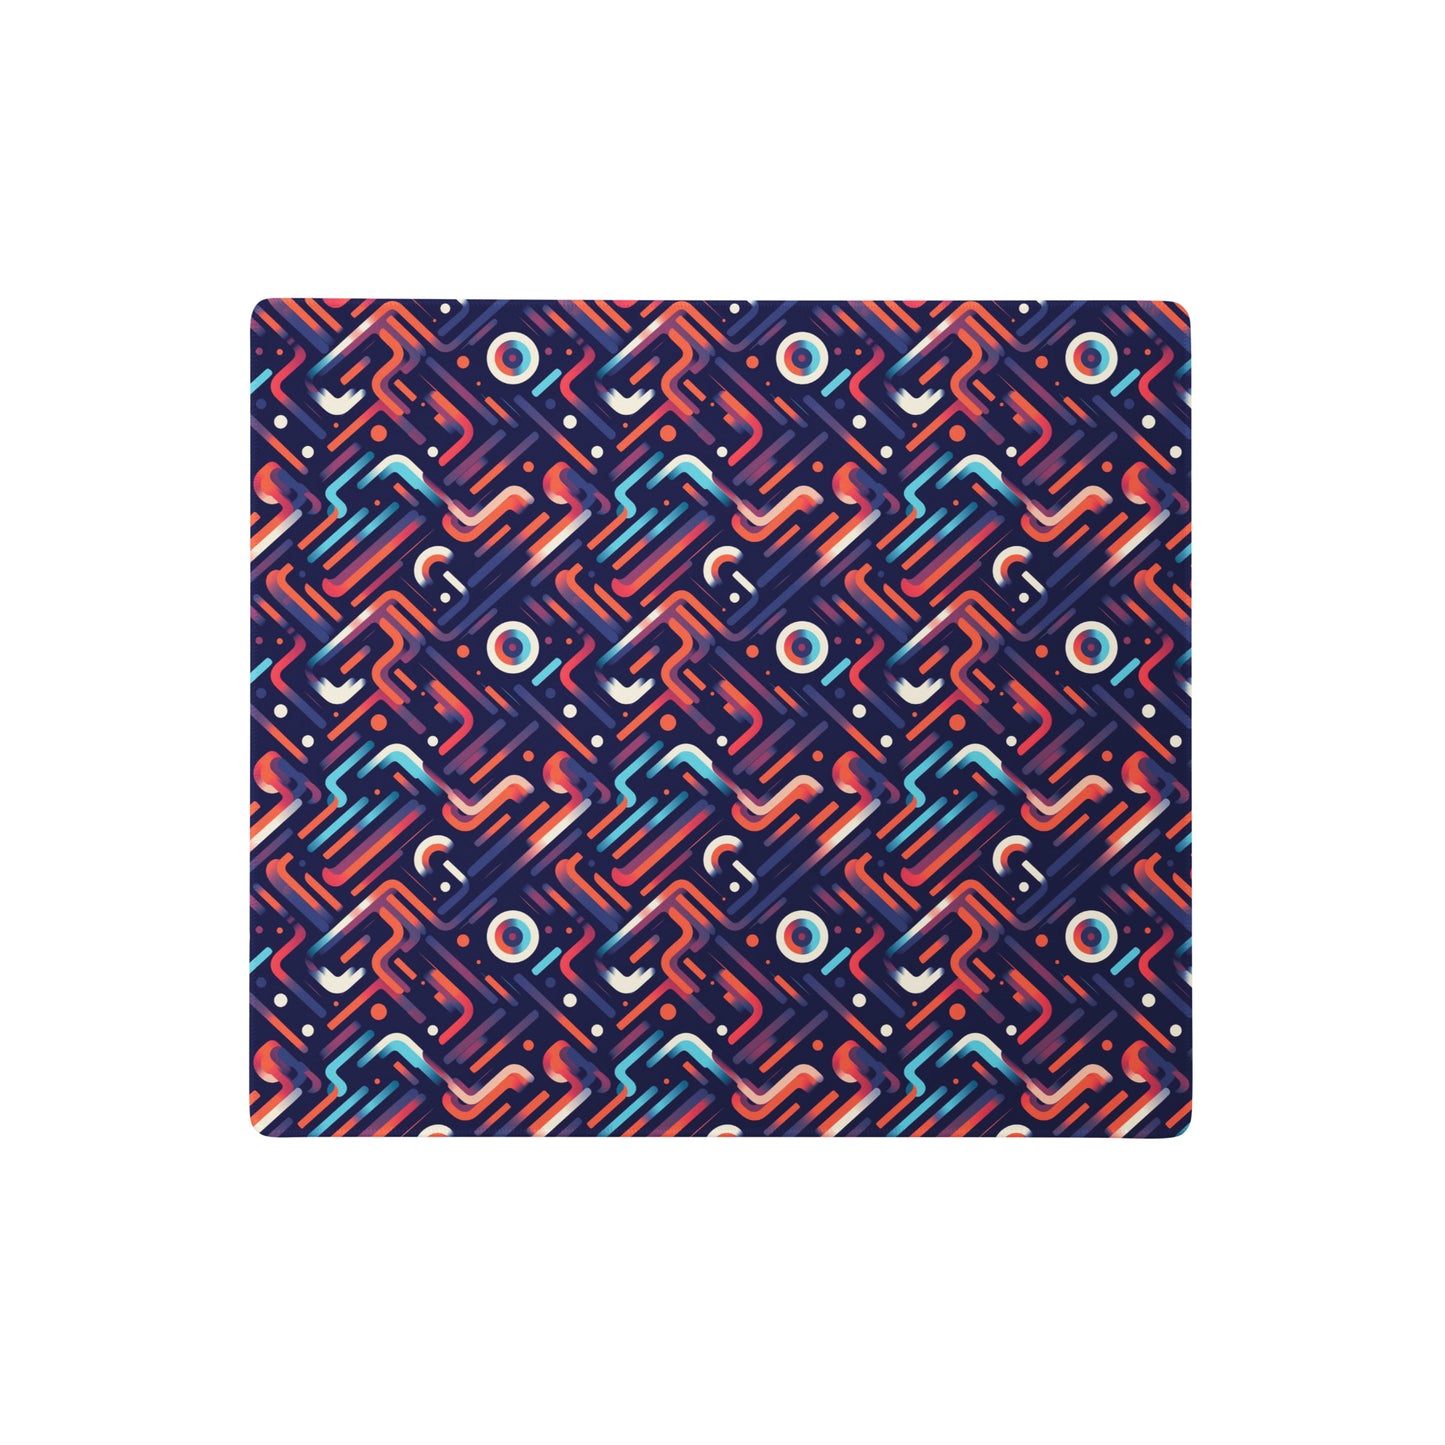 An 18" x 16" gaming desk pad with blue, orange, and purple lines on a dark blue background.